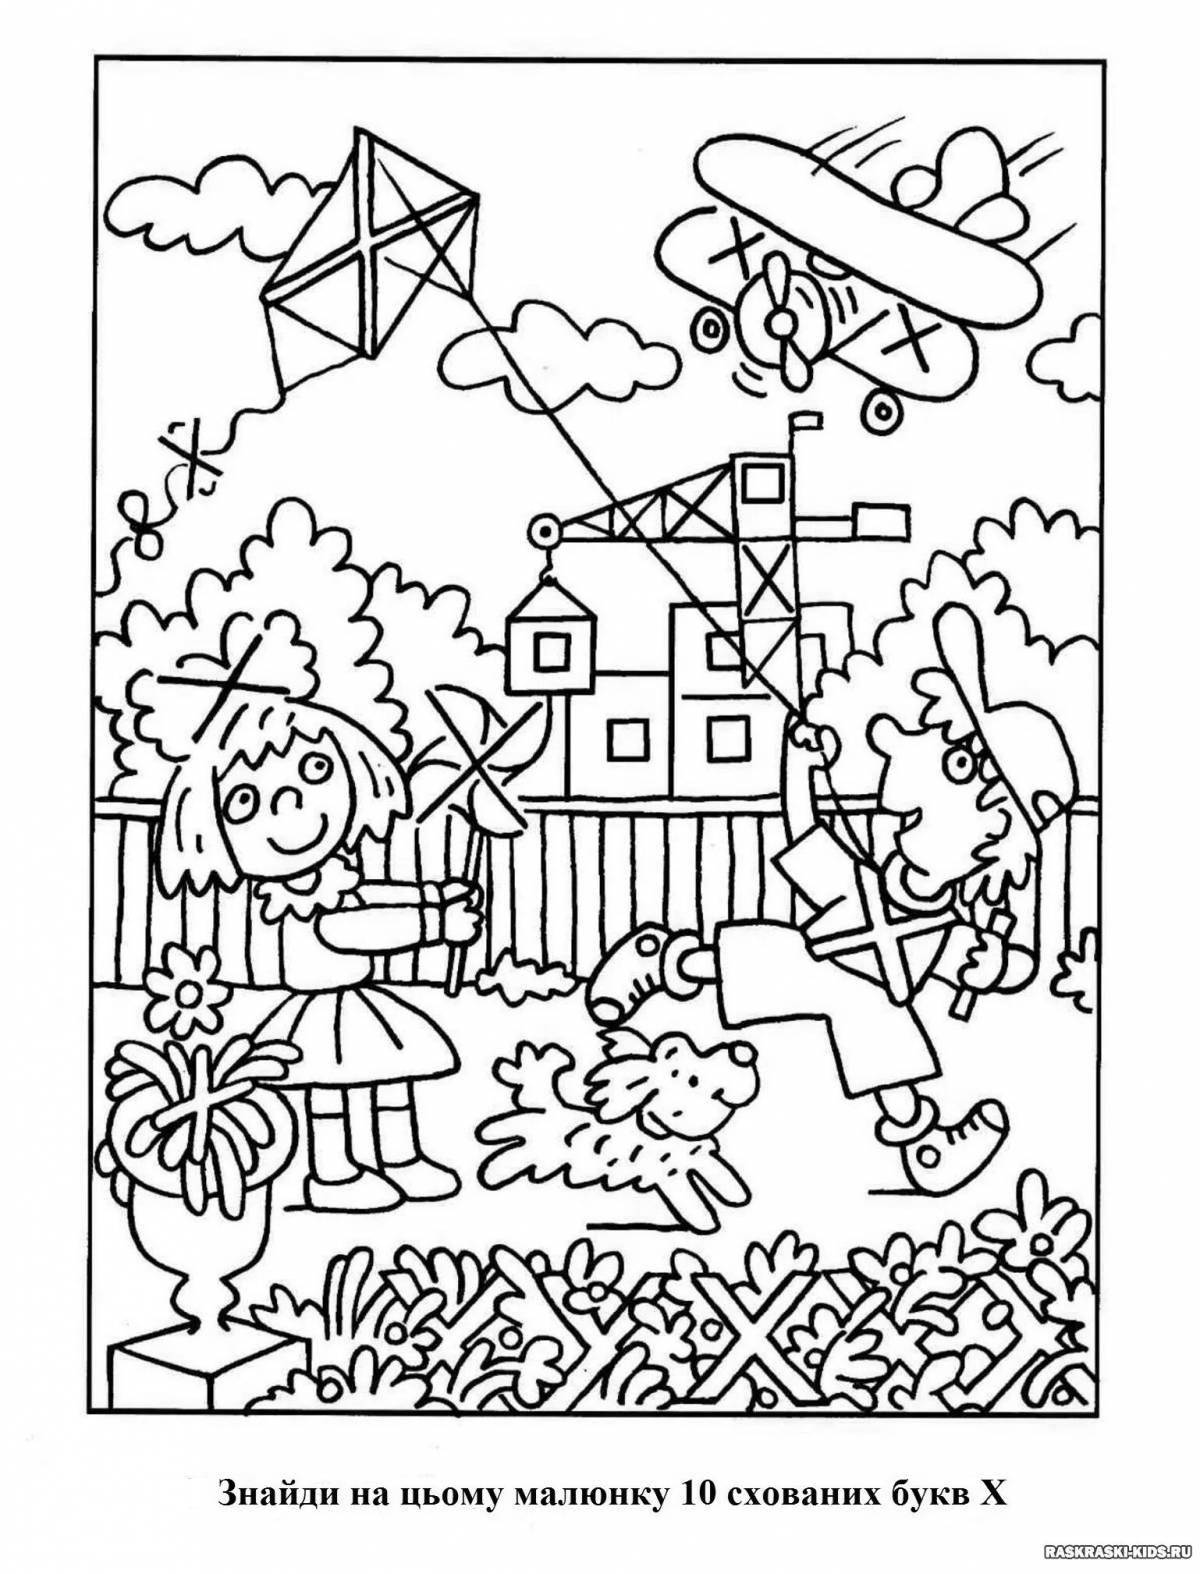 A fun coloring book with the letter x for preschoolers